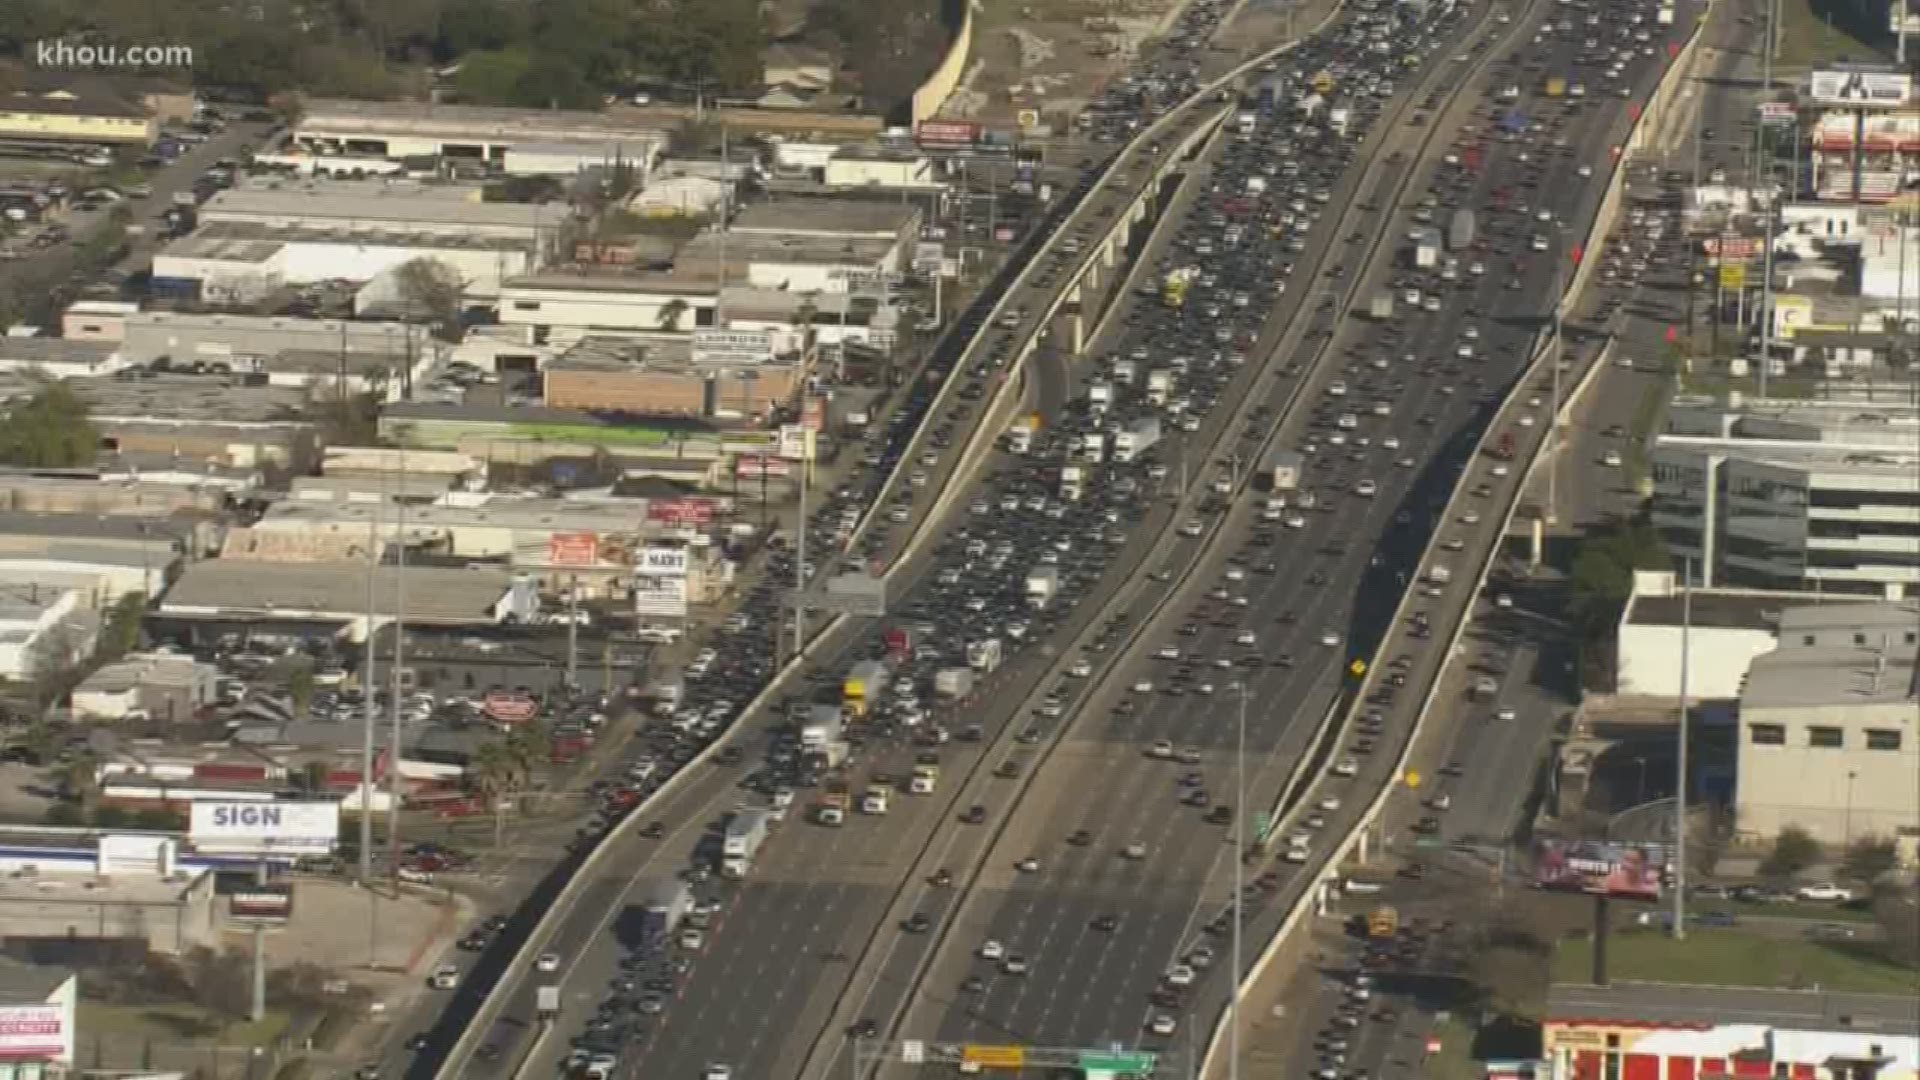 All southbound lanes of the Southwest Freeway at Harwin Drive are closed, causing a traffic backup for miles.